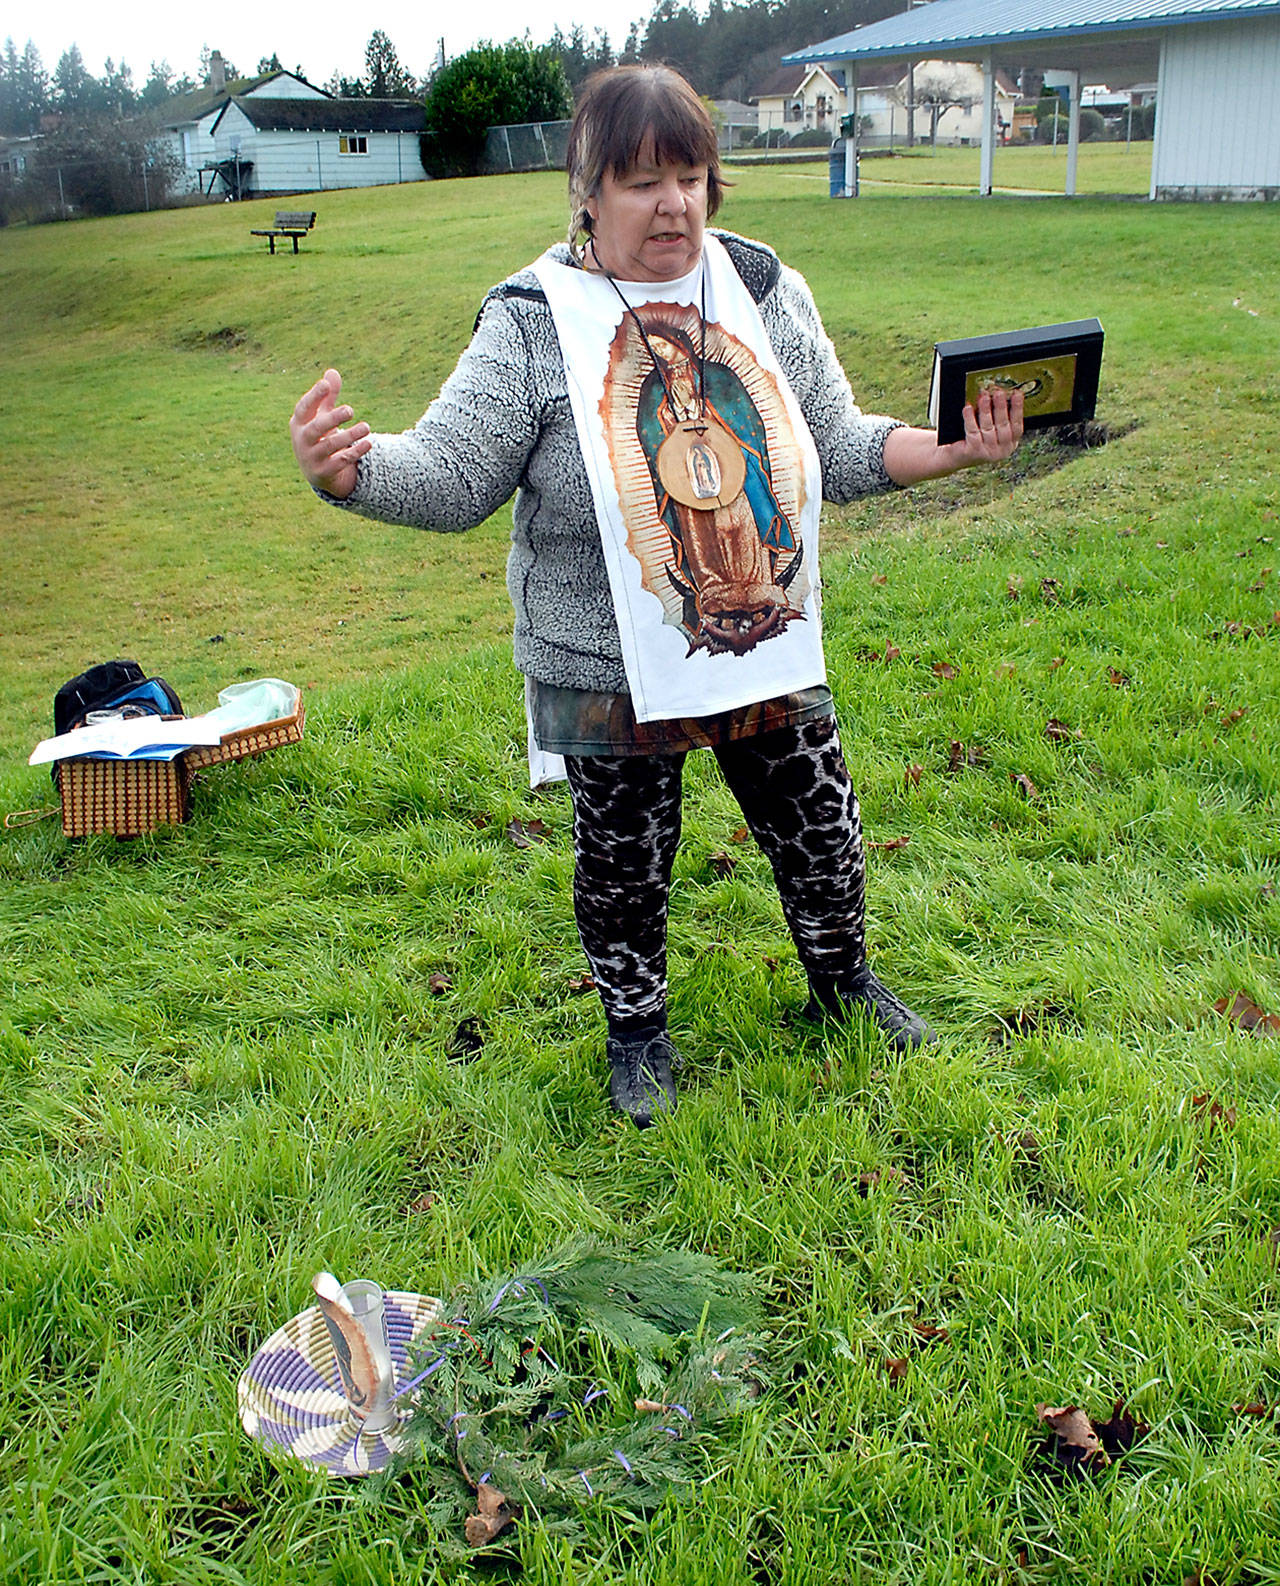 Devon Gray of Port Angeles eulogizes the felling of a beloved sequoia tree after placing a wreath and a candle where the tree once stood on Friday in Lions Park in Port Angeles. (Keith Thorpe/Peninsula Daily News)